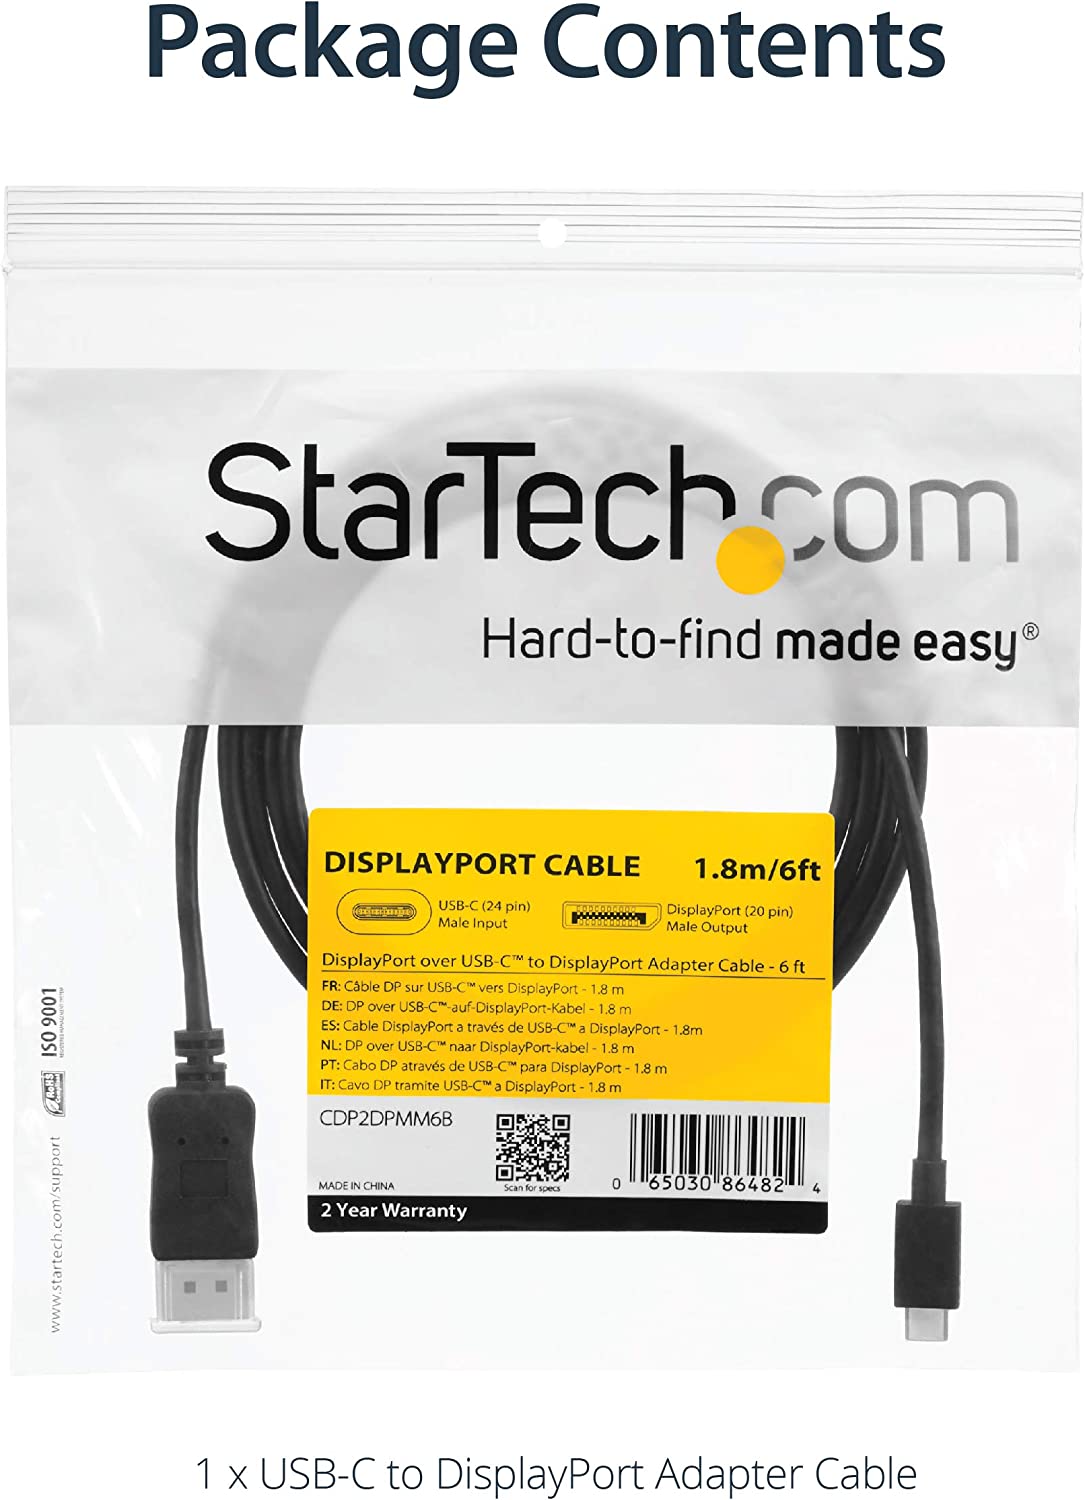 StarTech.com 6ft/1.8m USB C to DisplayPort 1.2 Cable 4K 60Hz - USB-C to DP Adapter HBR2 - USB Type-C DP Alt Mode to DP Monitor Video Cable (CDP2DPMM6B) - Limited stock, see similar item CDP2DP2MBD 6 ft / 2 m Black